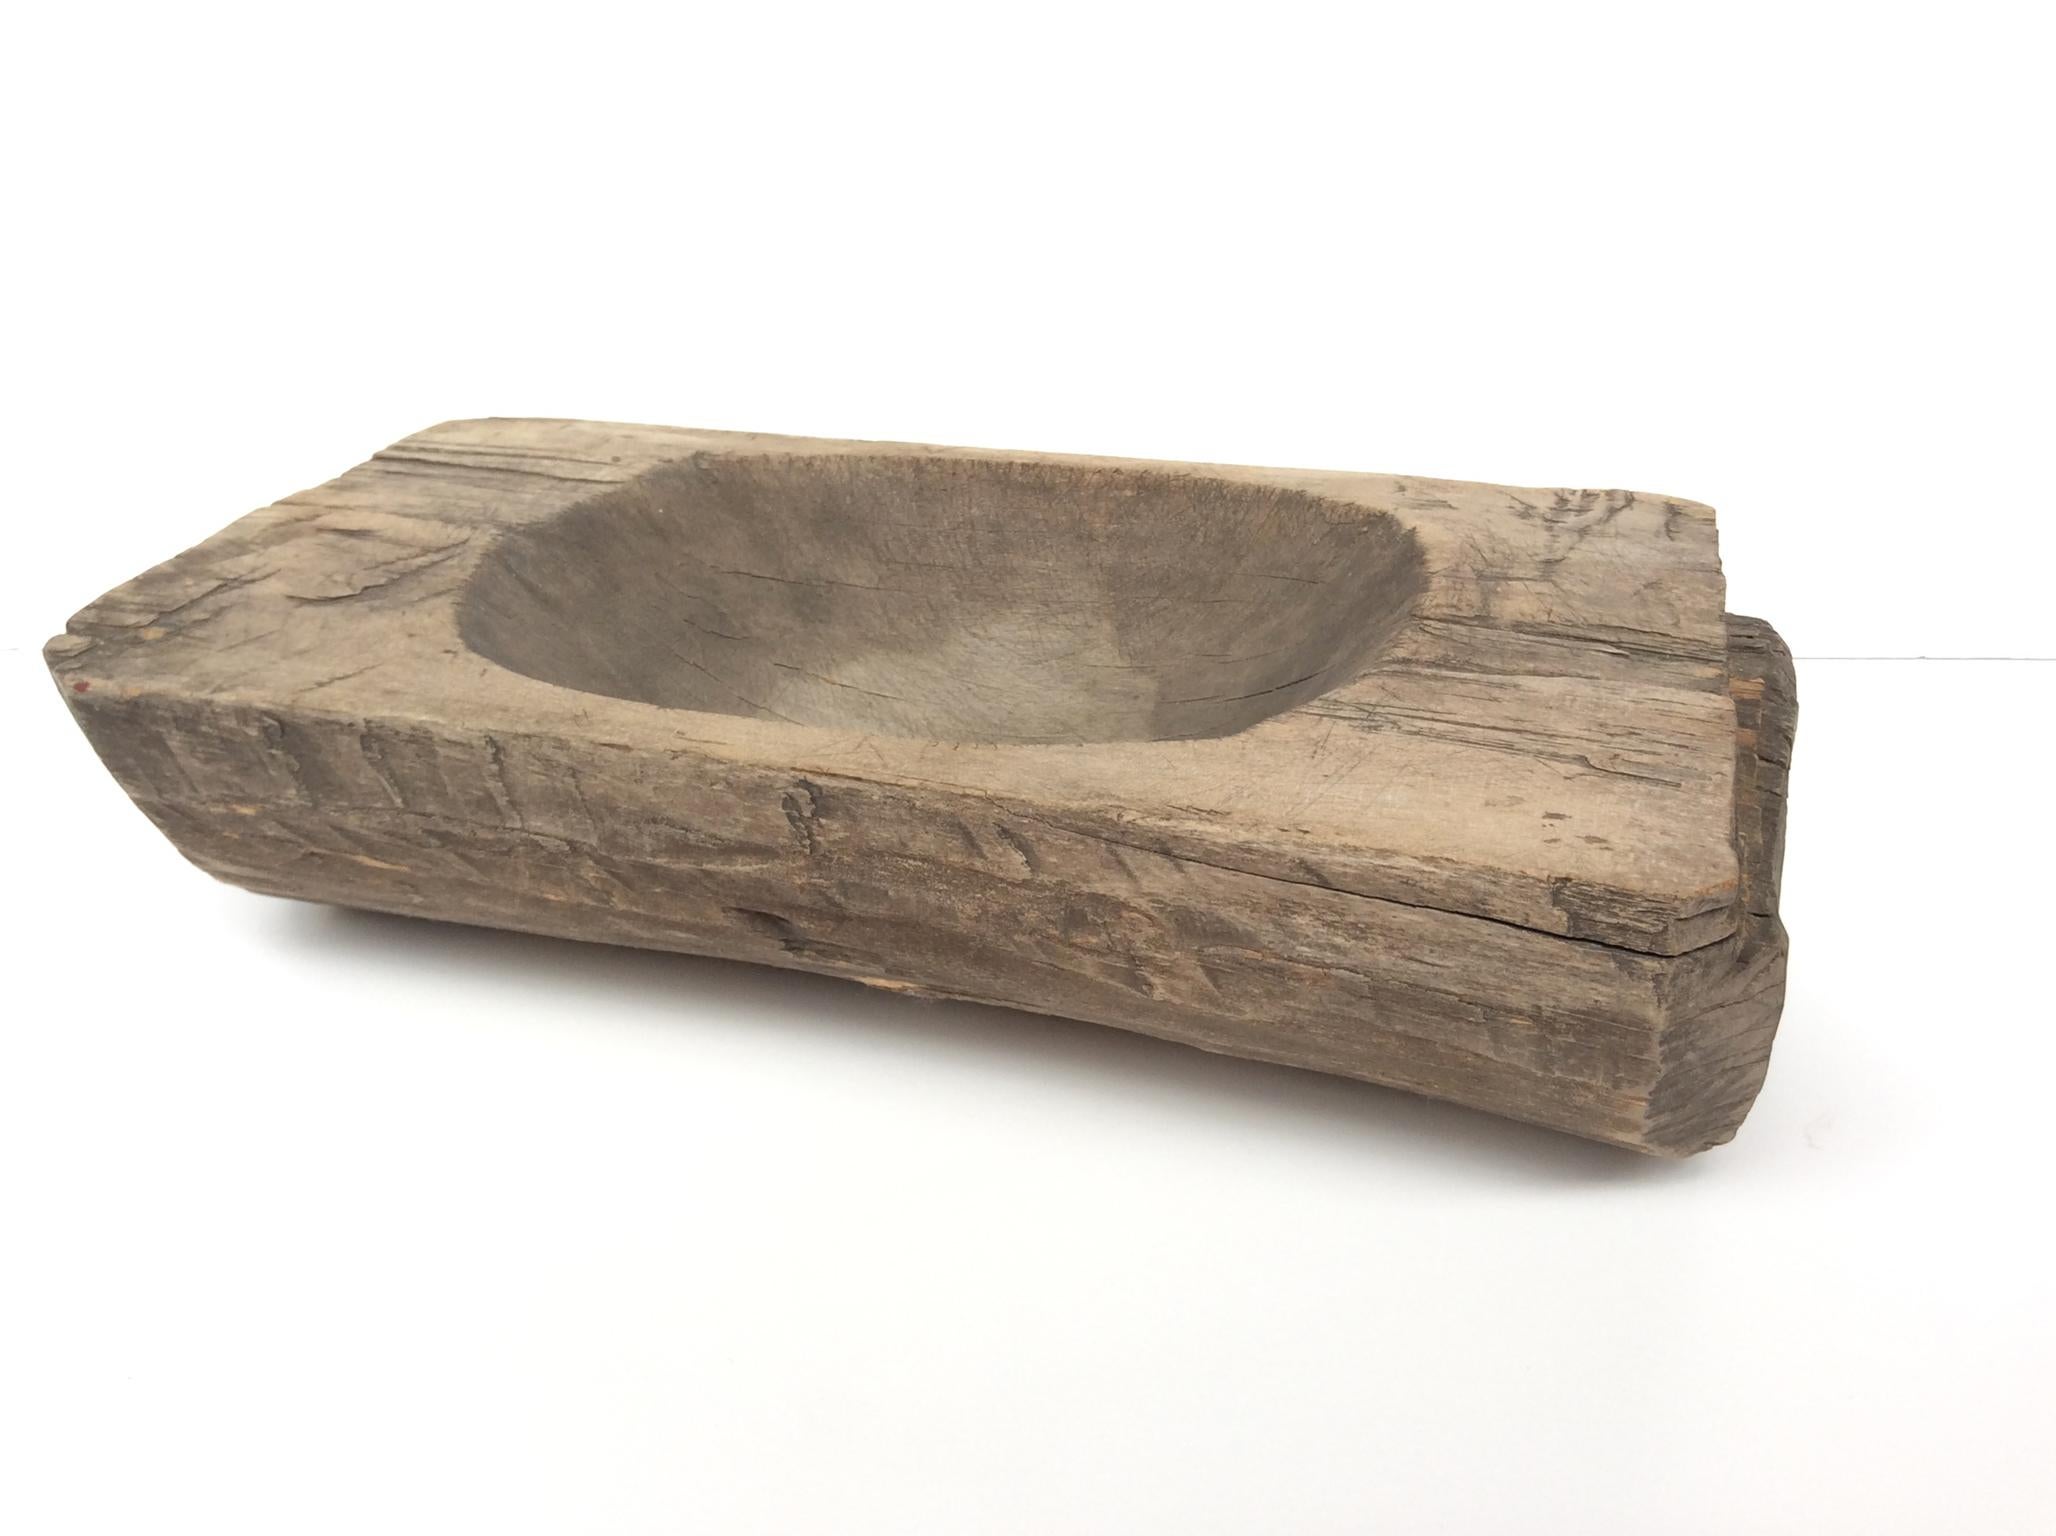 A rustic, beautifully aged 18th Century trencher. Trenchers were used as tableware for serving food. This particular trencher was carved from chestnut wood. The marks and wear of the wood give the trencher a sculptural texture and a very tangible